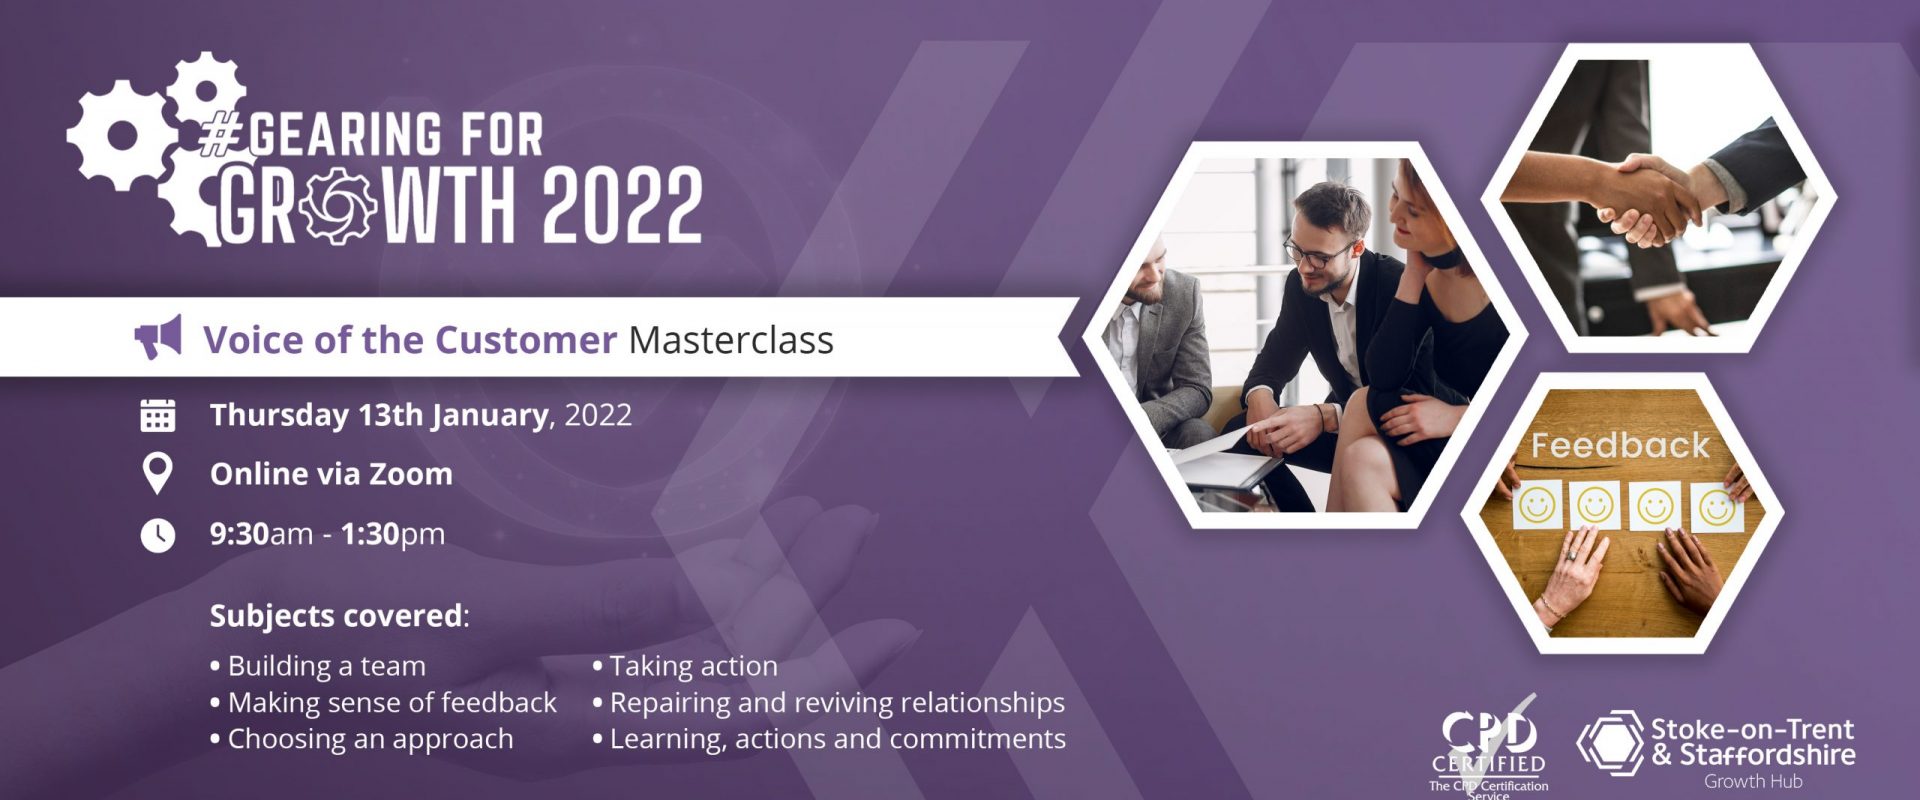 #GEARINGFORGROWTH2022: Voice of the Customer Masterclass - CPD Accredited